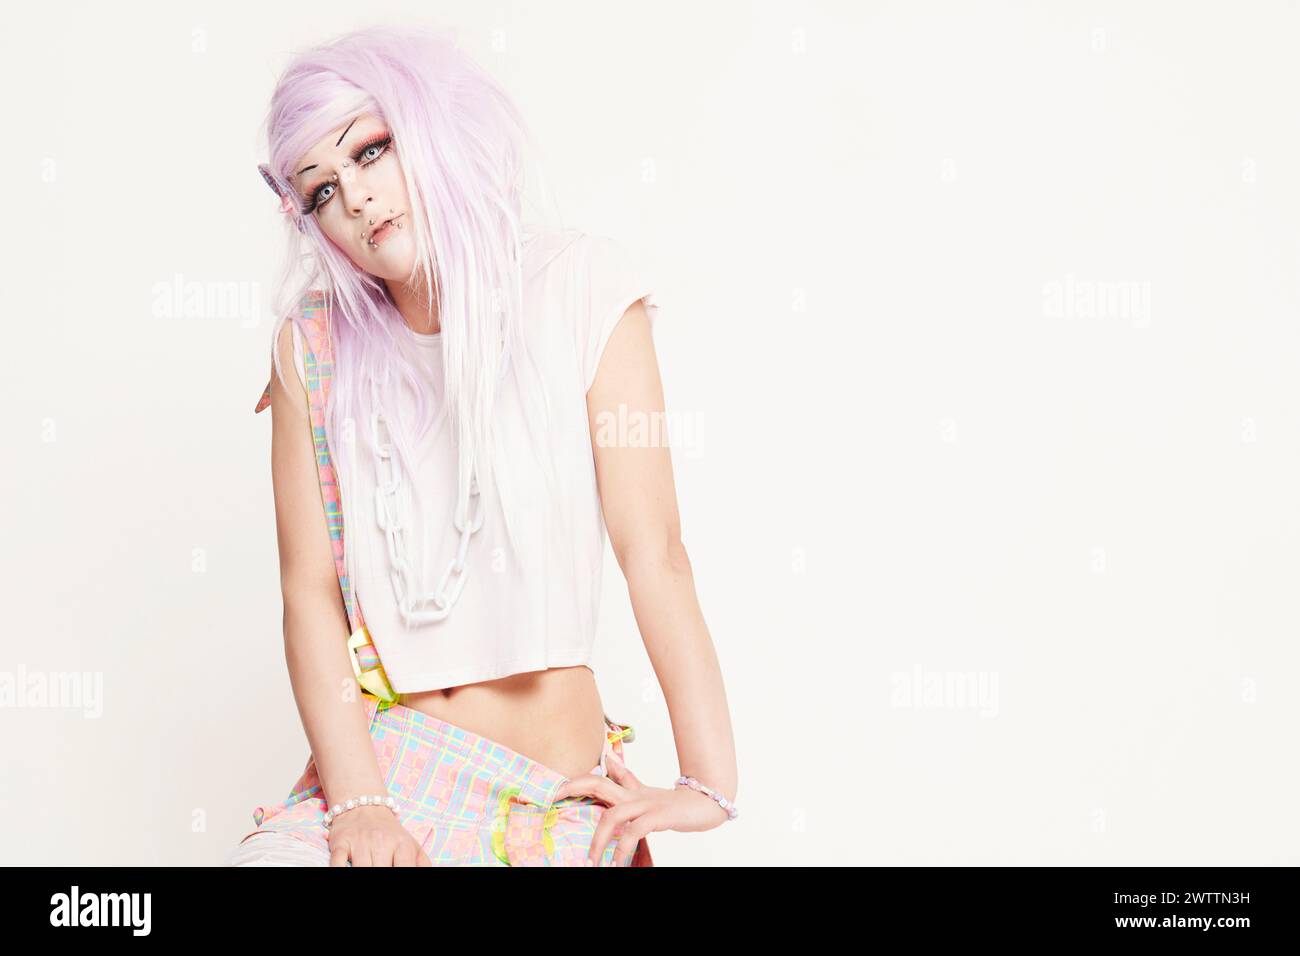 Alternative fashion model with pastel hair and piercings Stock Photo